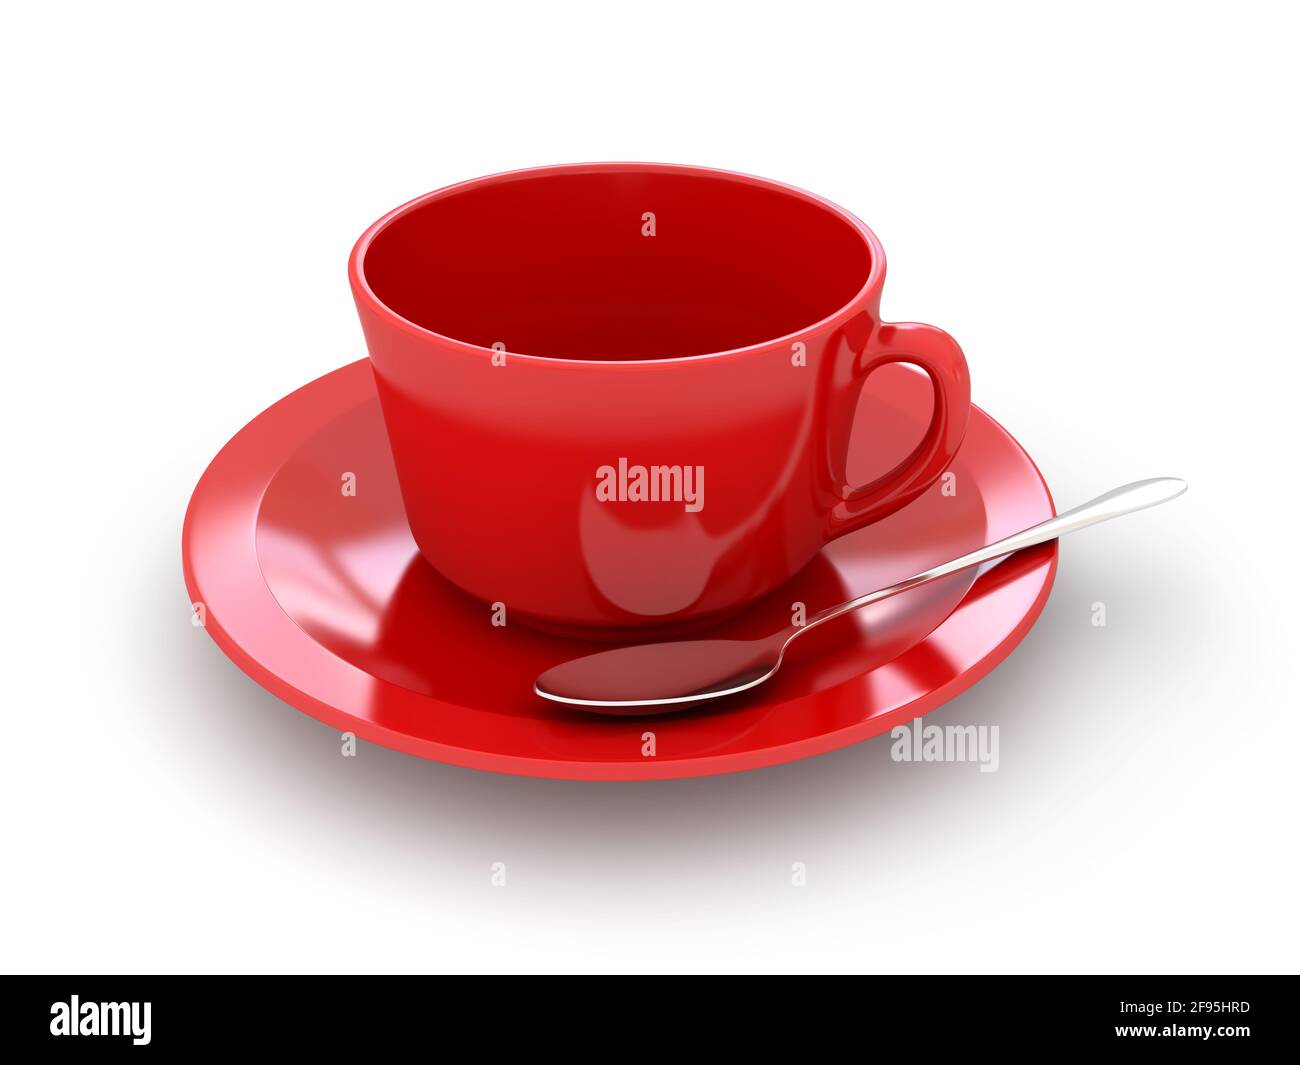 Red coffee cup and saucer with spoon on a white background. 3d rendered image Stock Photo